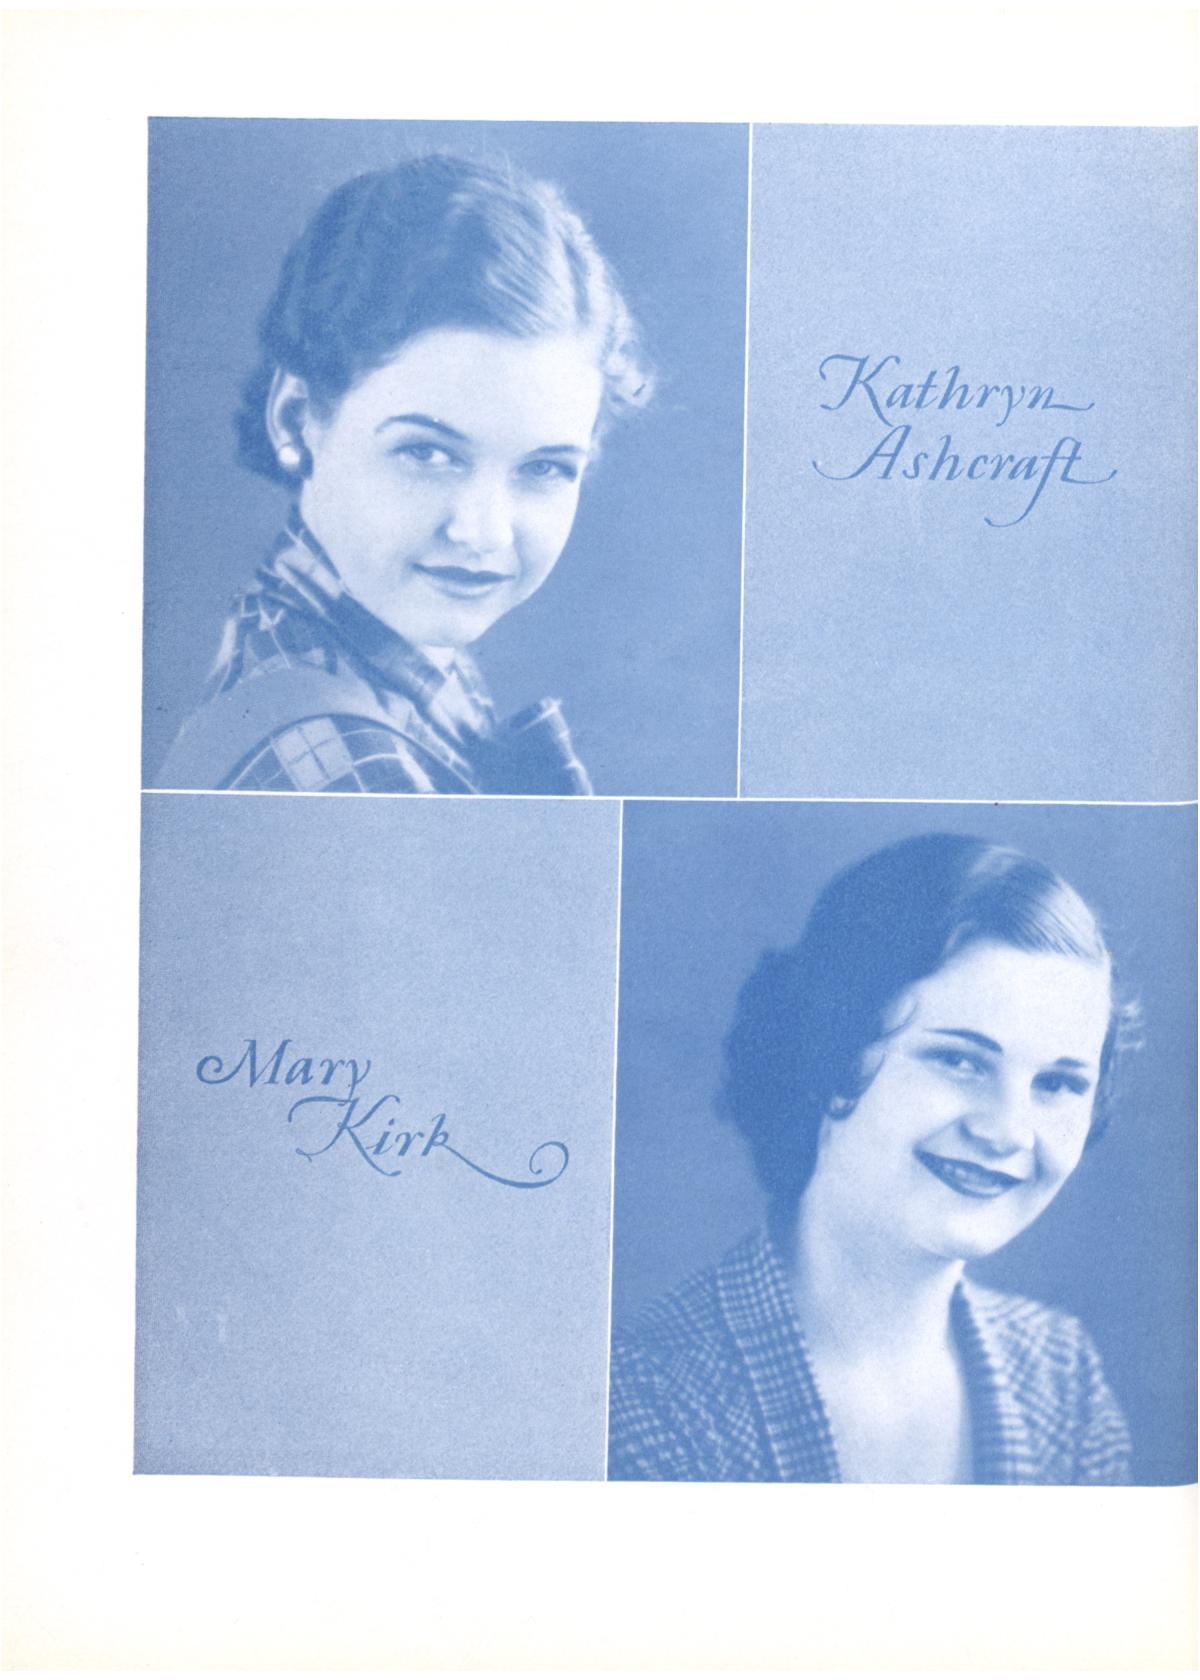 The Lasso, Yearbook of Howard Payne College, 1933
                                                
                                                    56
                                                